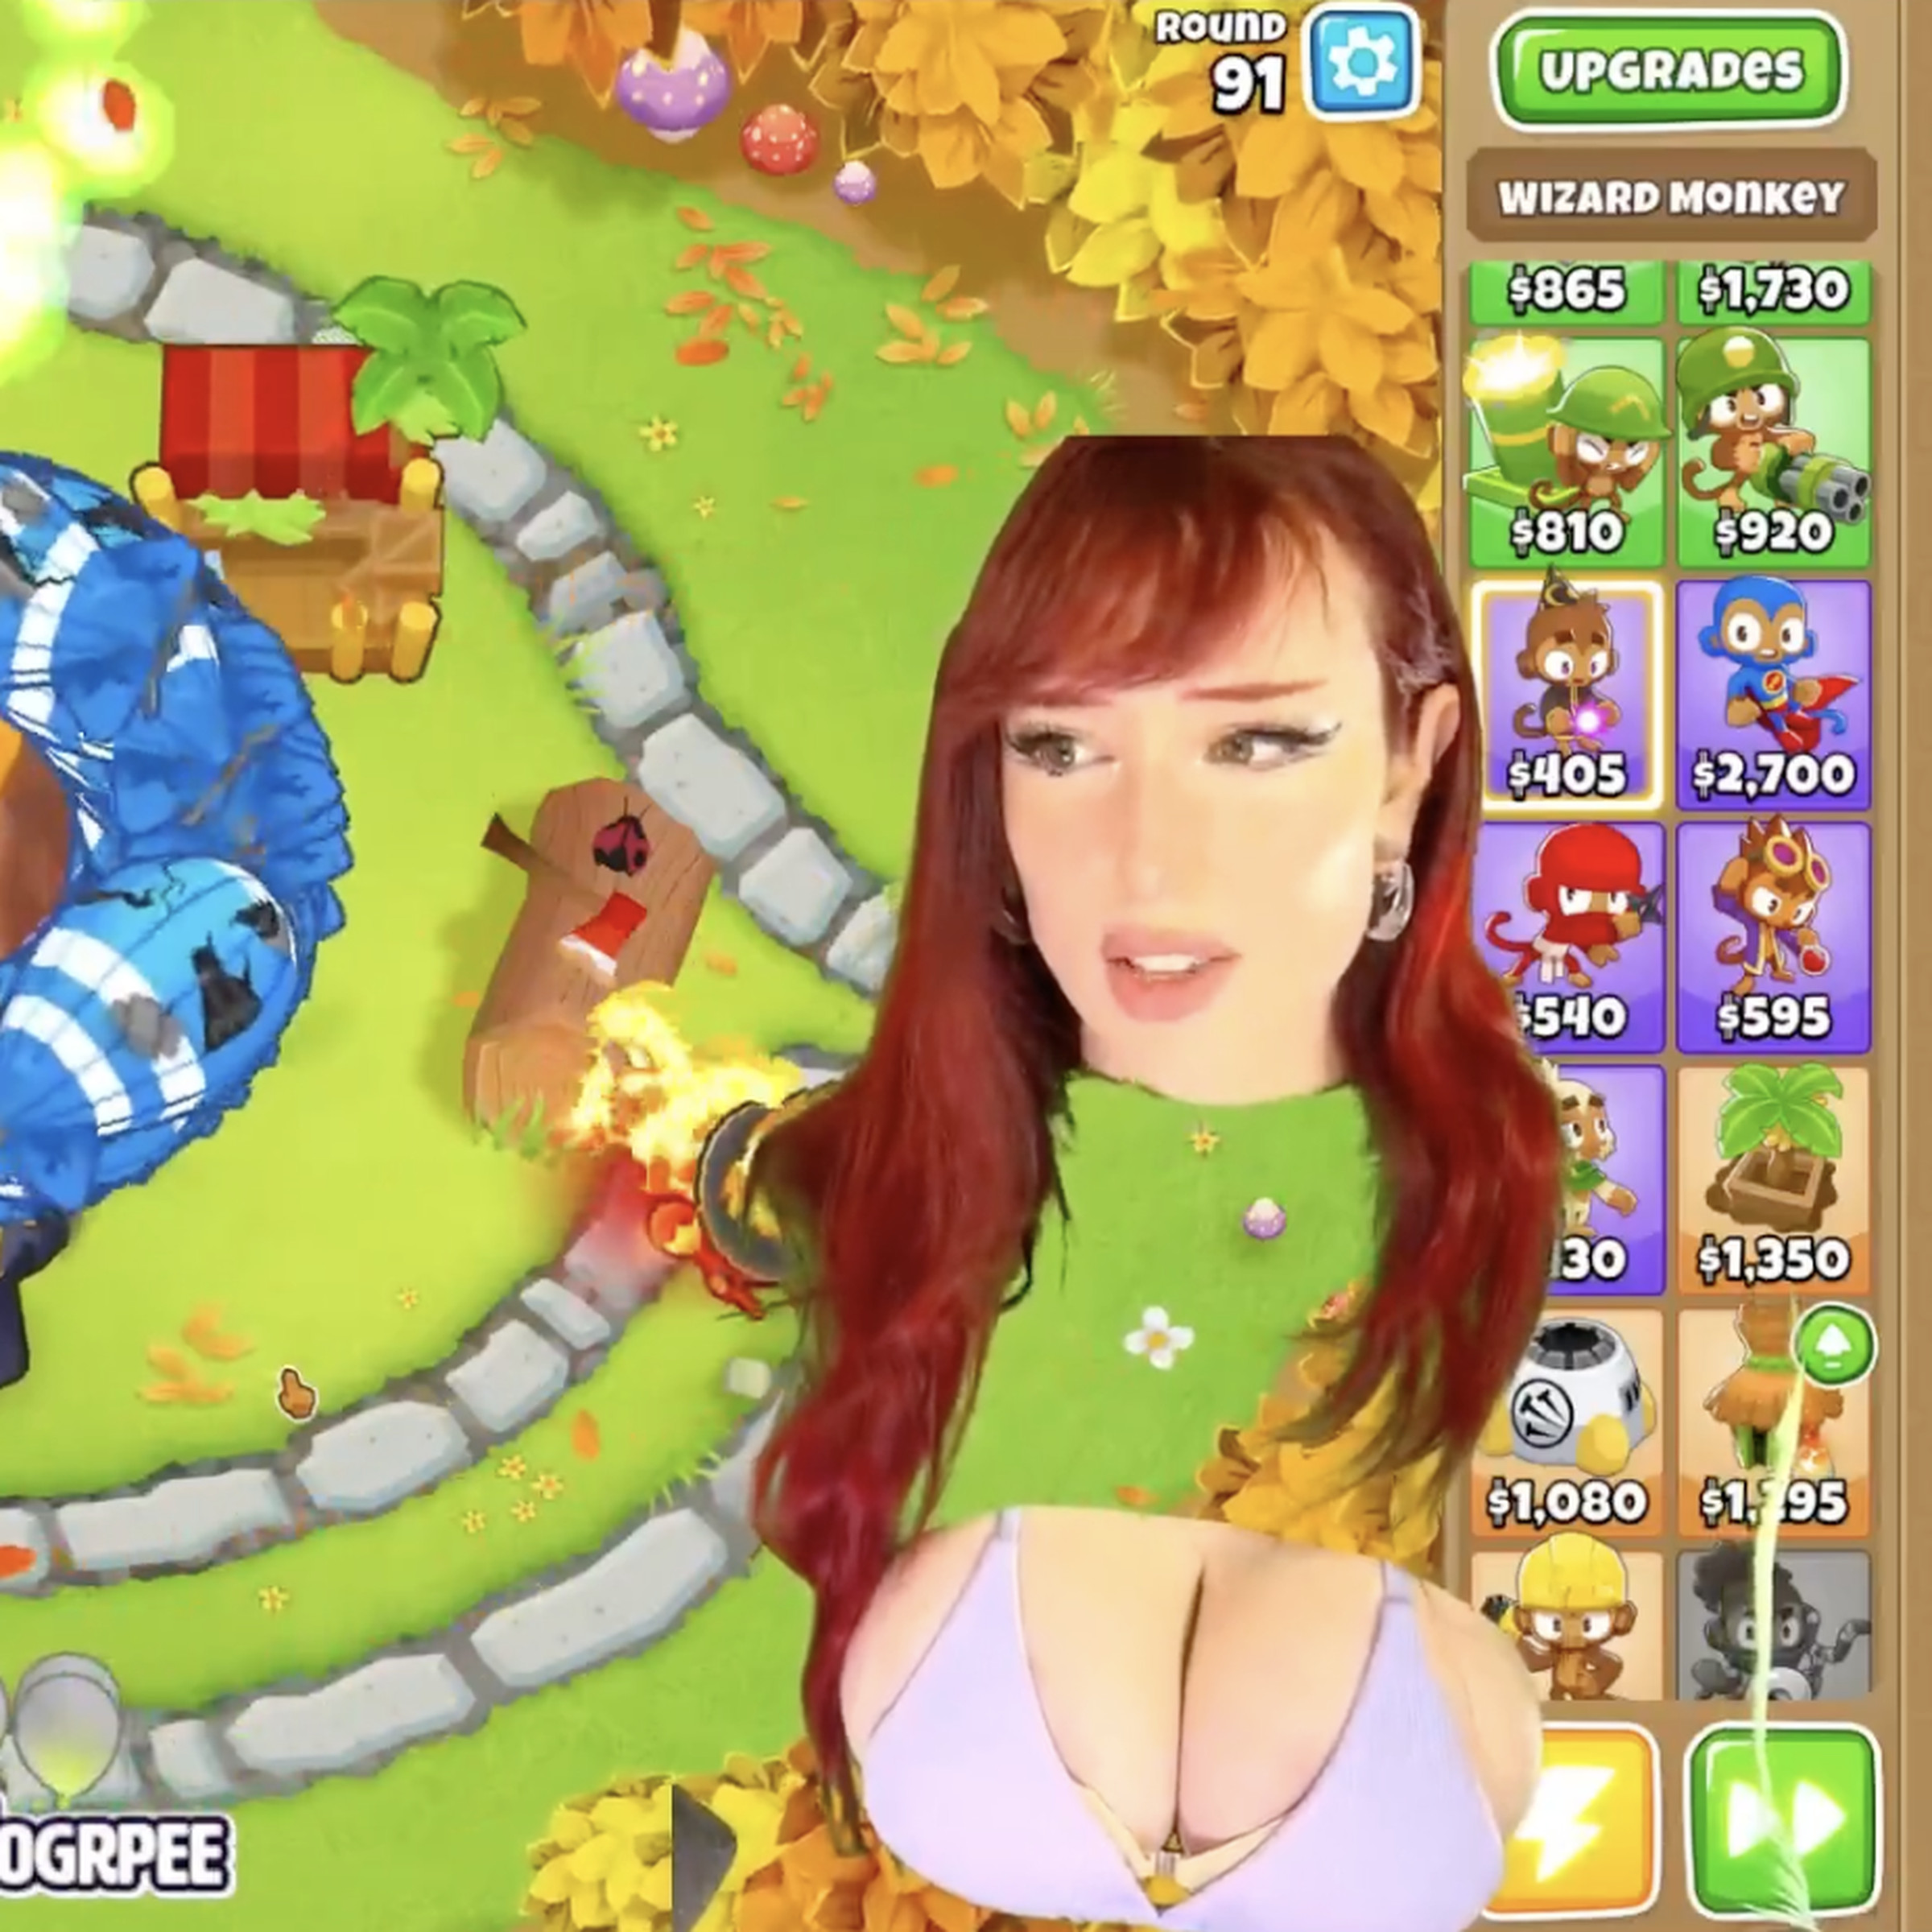 Screenshot from the livestream of Twitch creator Morgpie, a red-haired woman playing Bloons TD 6